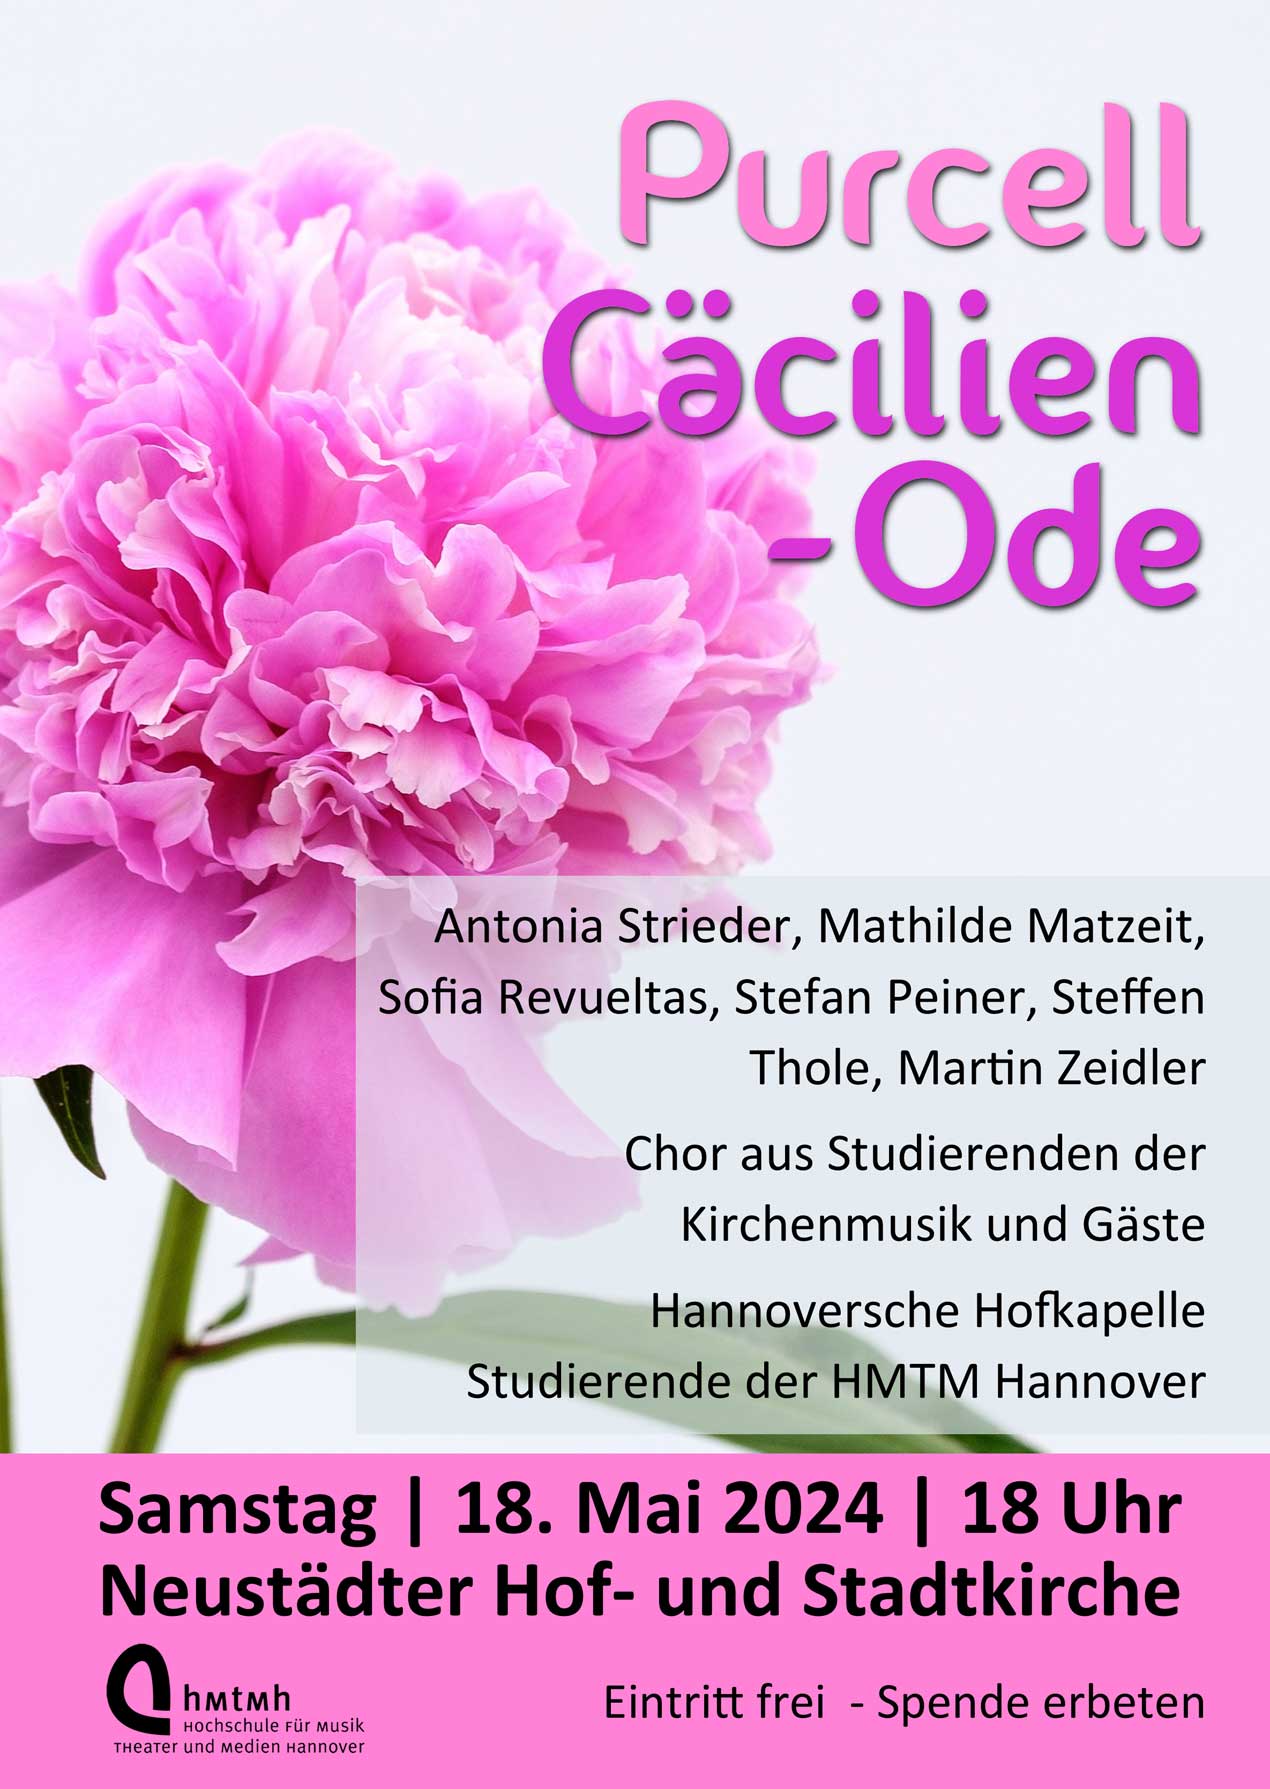 Plakat Purcell Caecilien Ode 2024 05 18